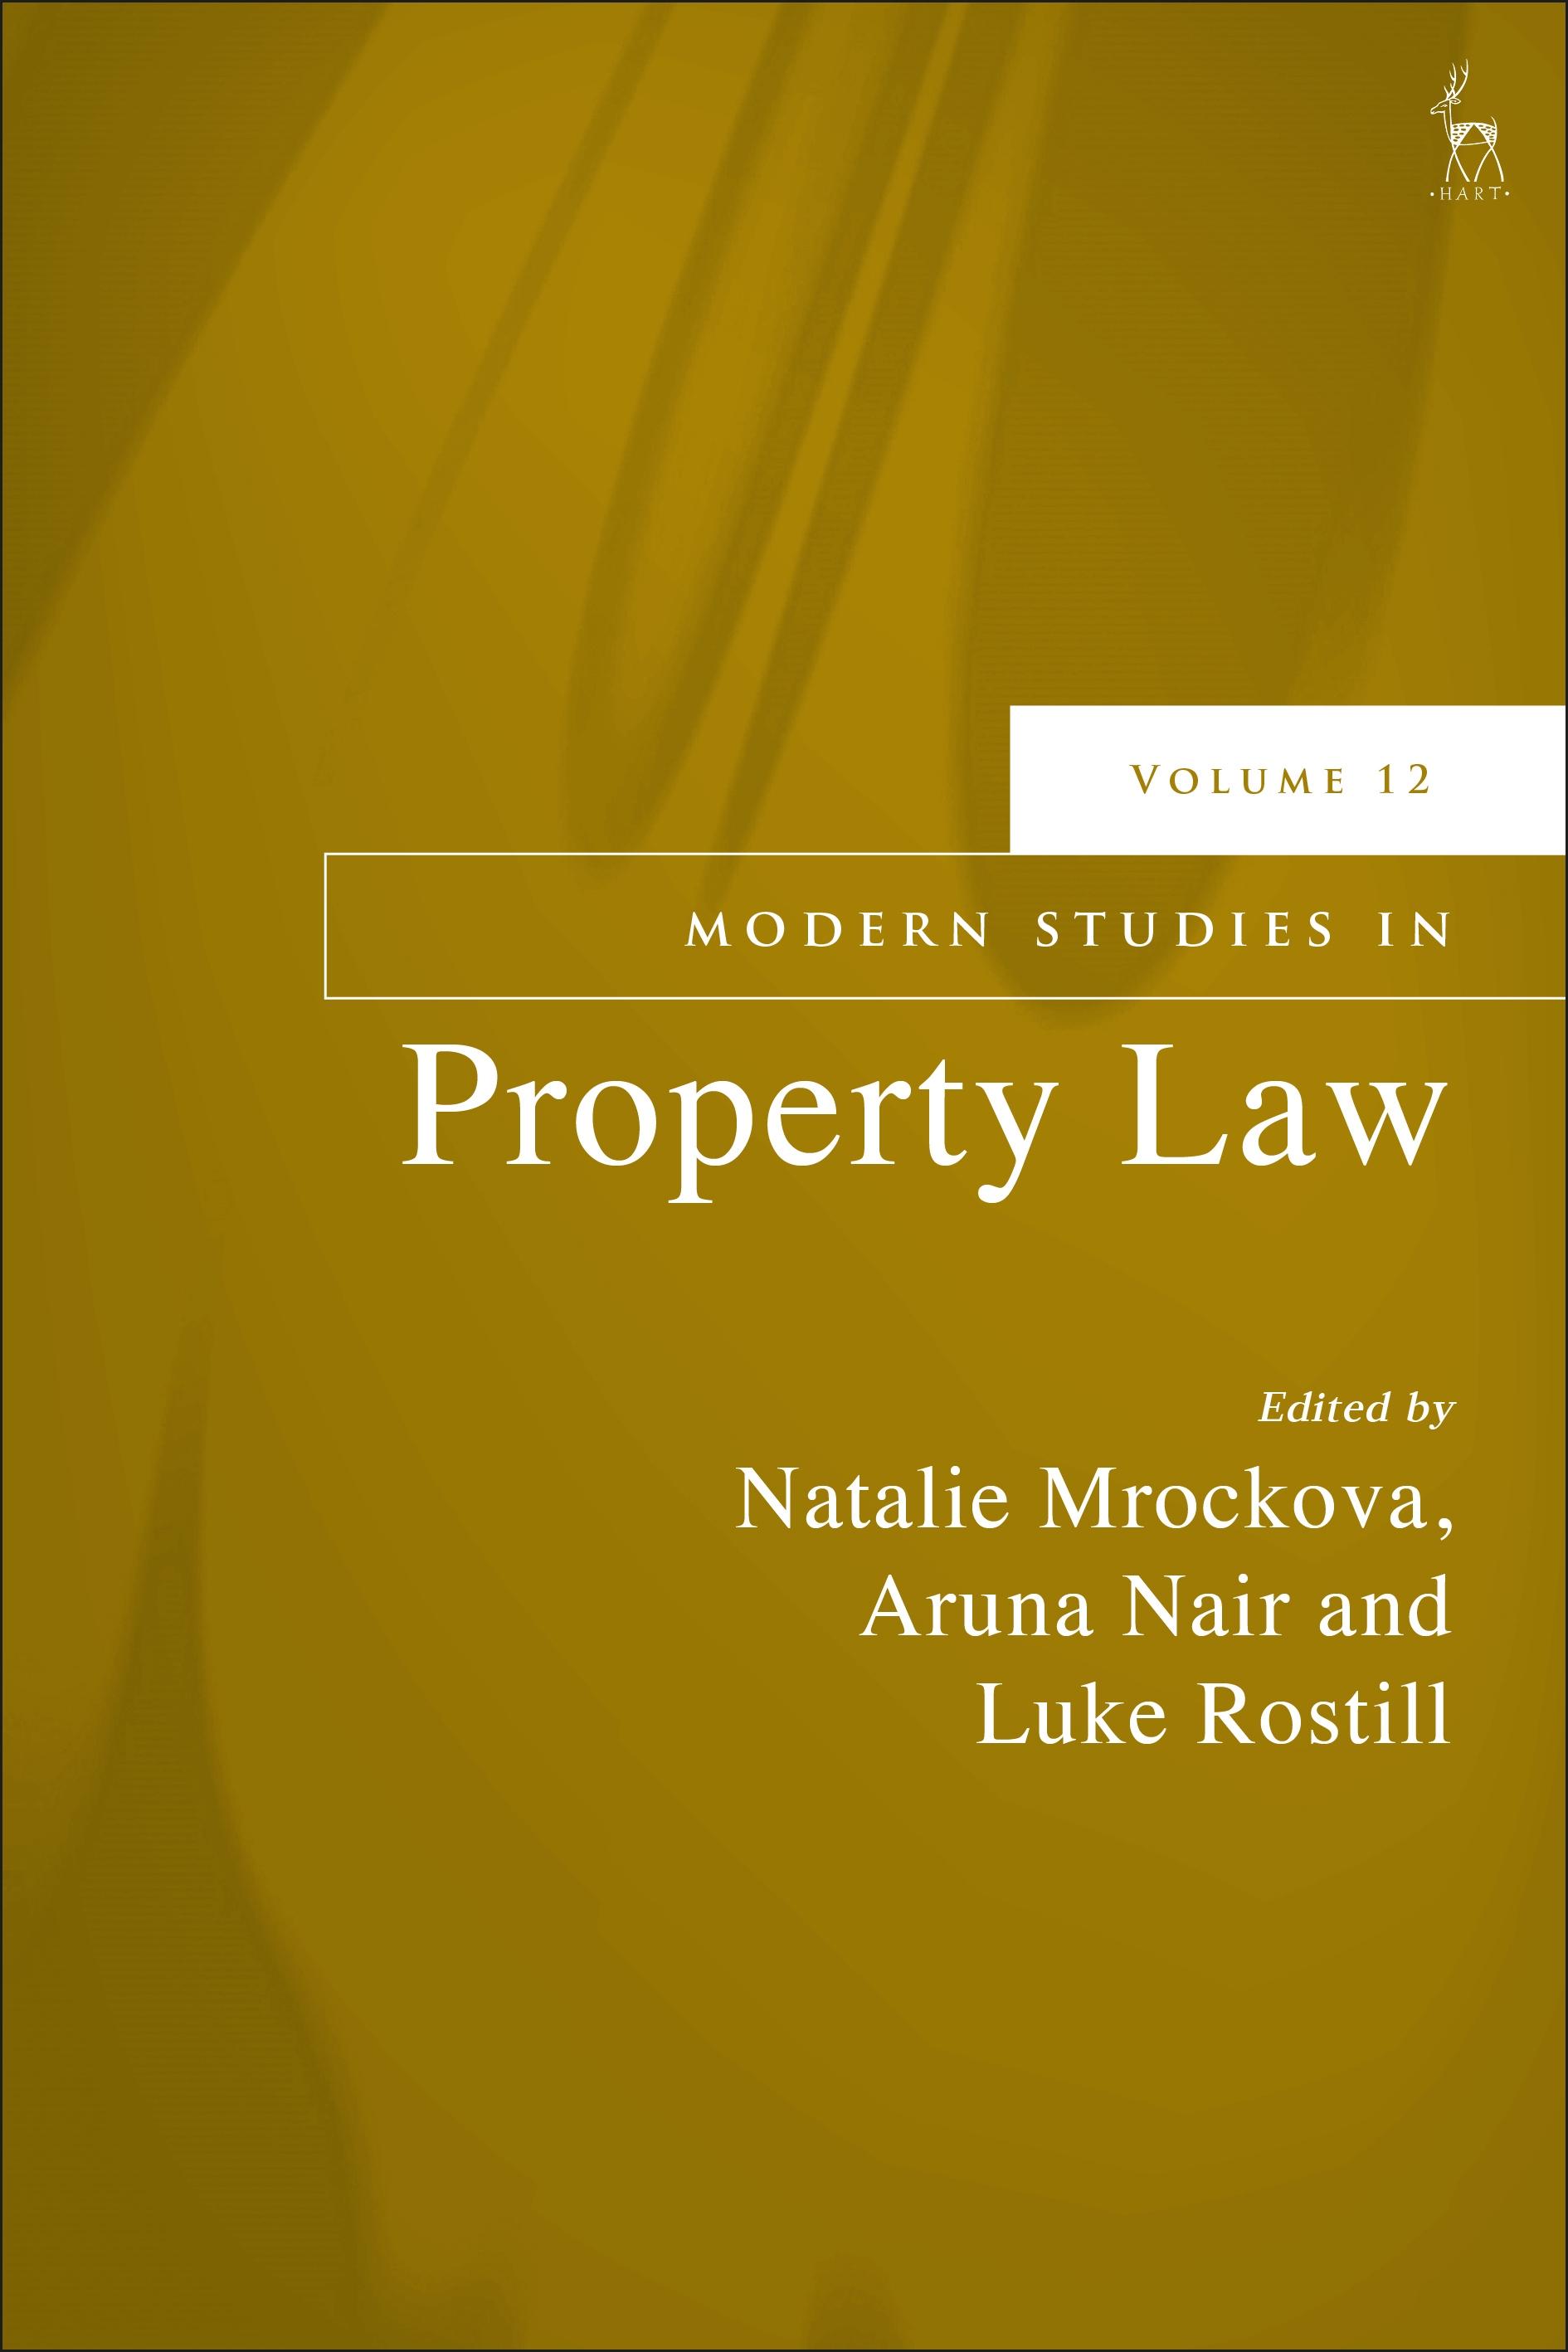 Modern Studies in Property Law book cover -text over a greeny brown swirl